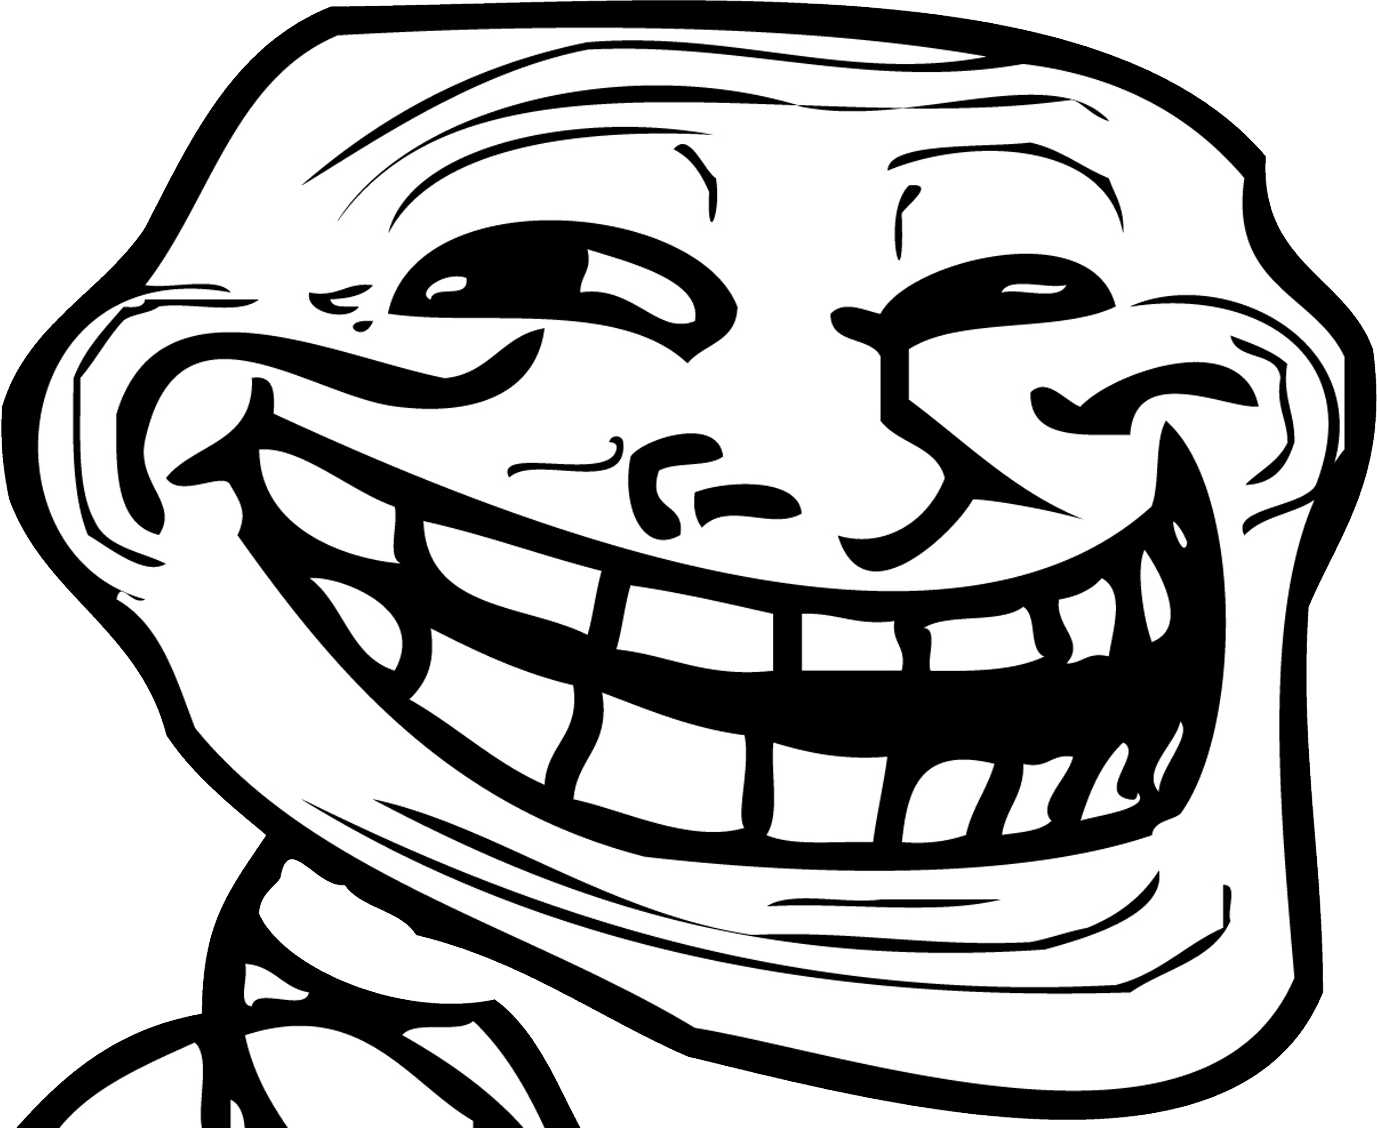 Trollface PNG images free download